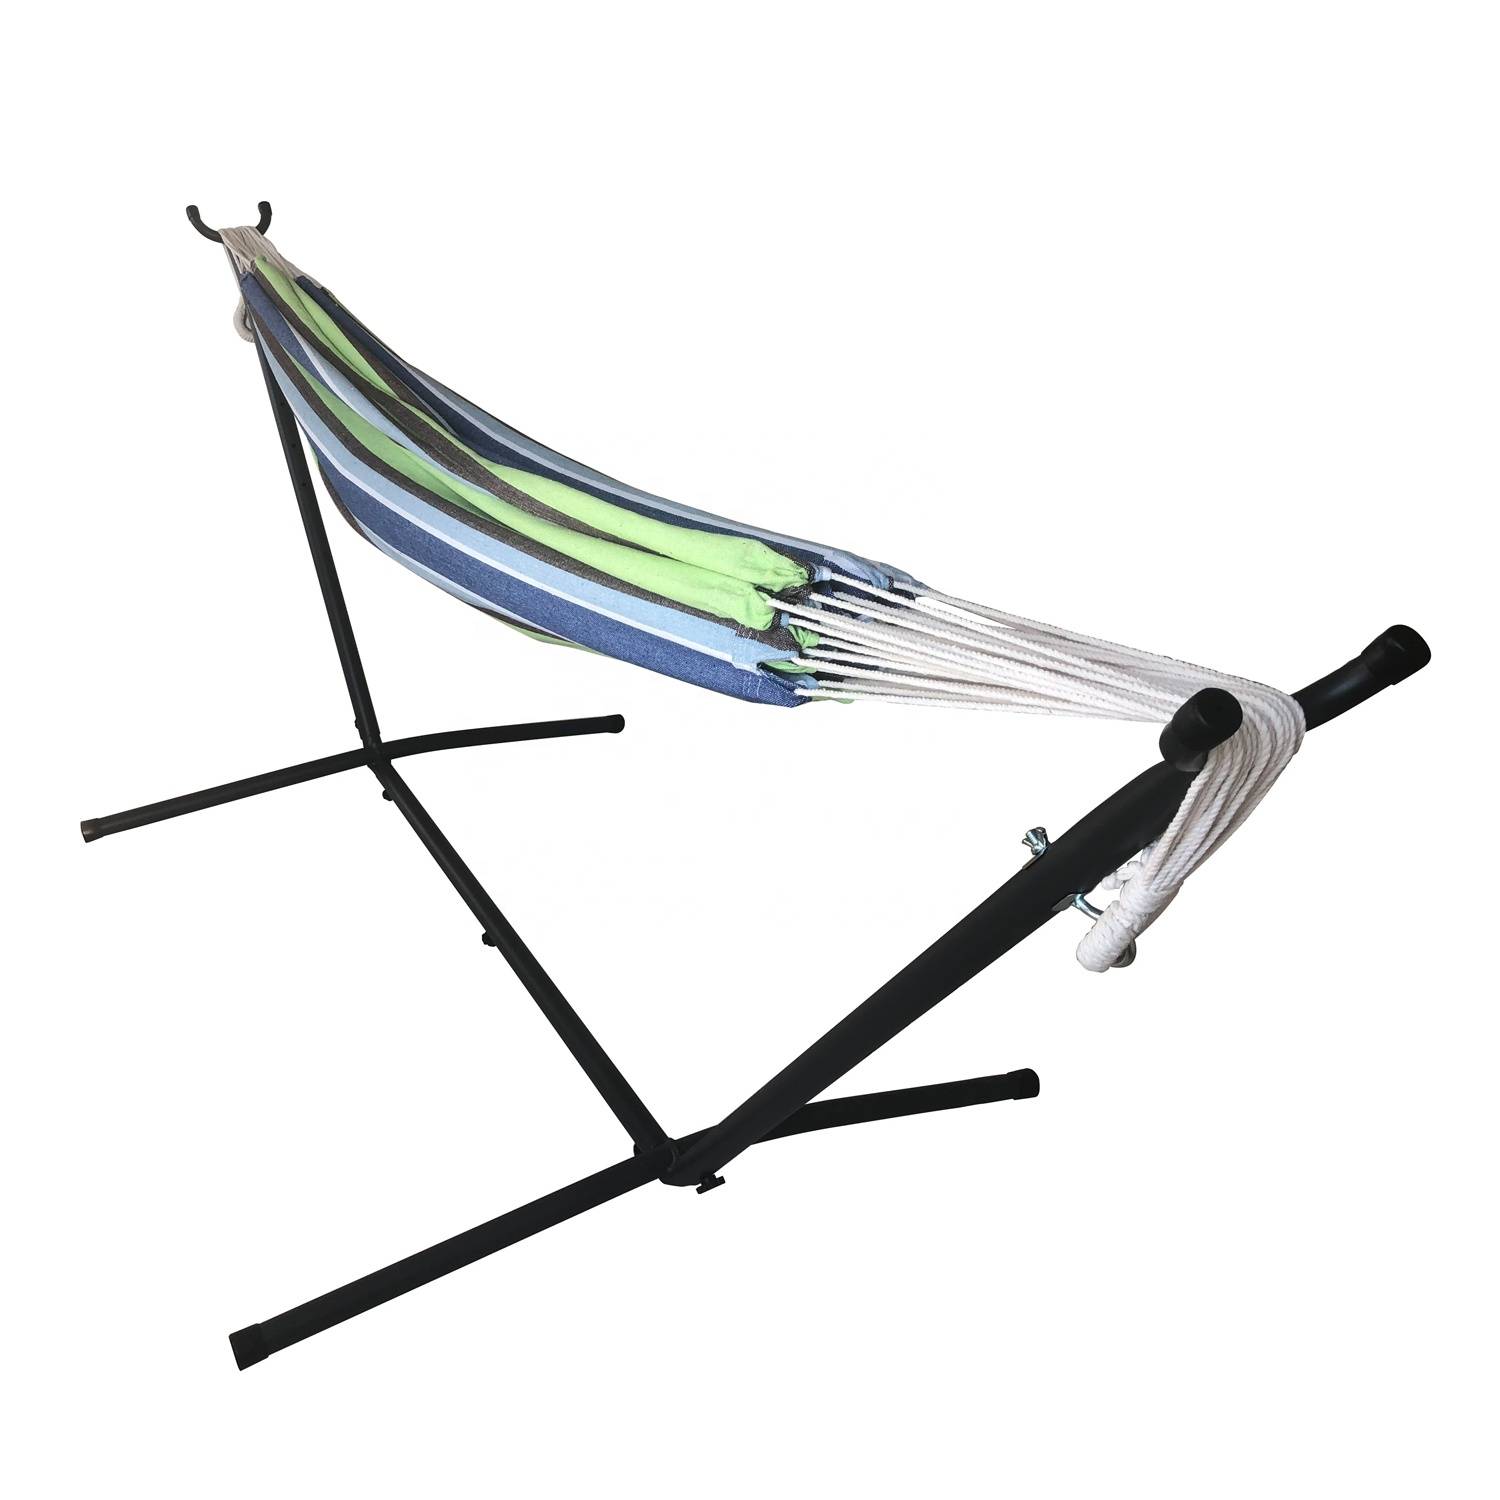 Striped Hammock with Metal Stand Deluxe Set Includes Portable Carrying Case